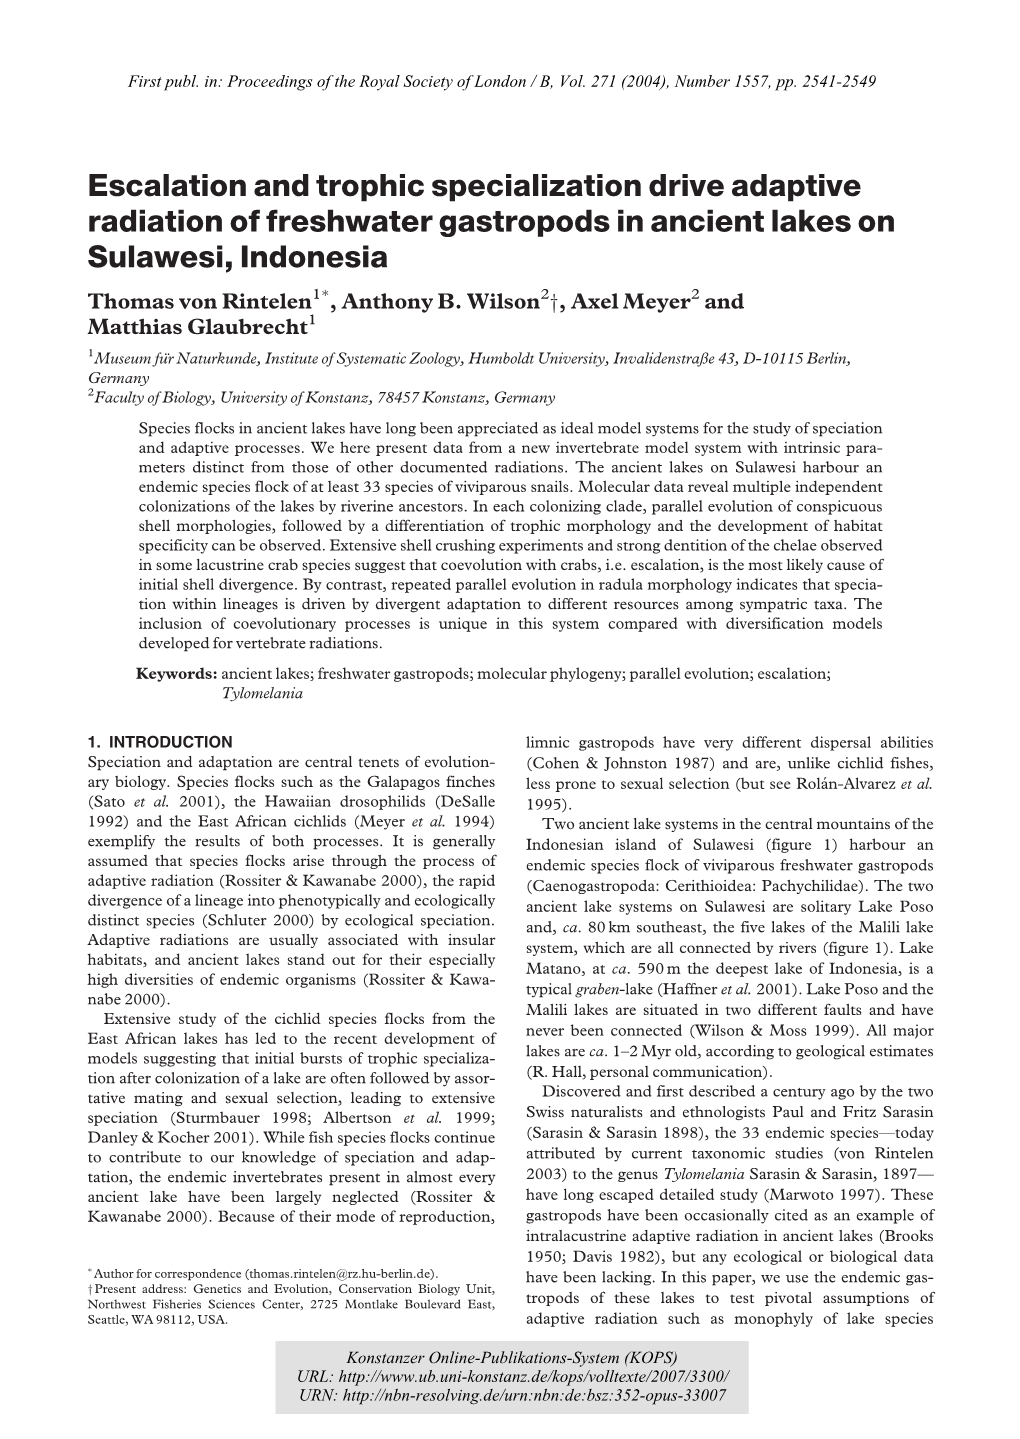 Escalation and Trophic Specialization Drive Adaptive Radiation of Freshwater Gastropods in Ancient Lakes on Sulawesi, Indonesia Thomas Von Rintelen1�, Anthony B